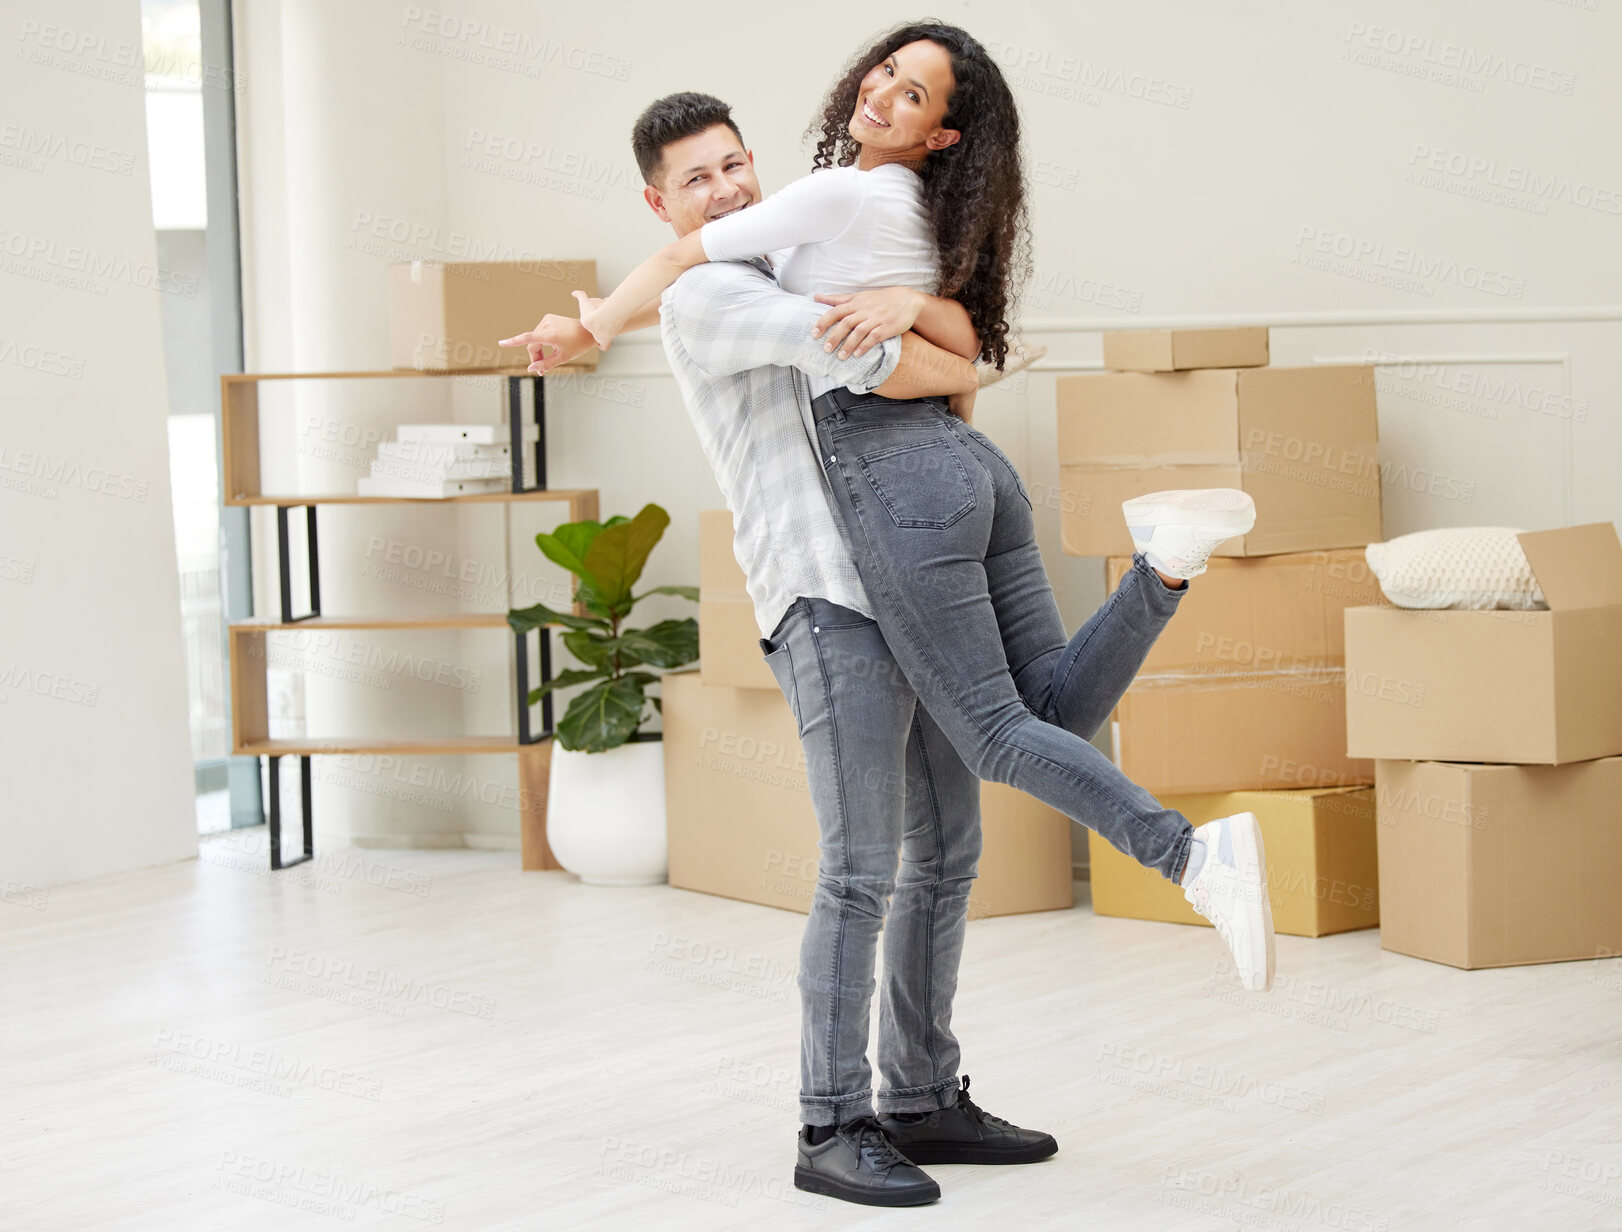 Buy stock photo Shot of a young couple moving into their new home